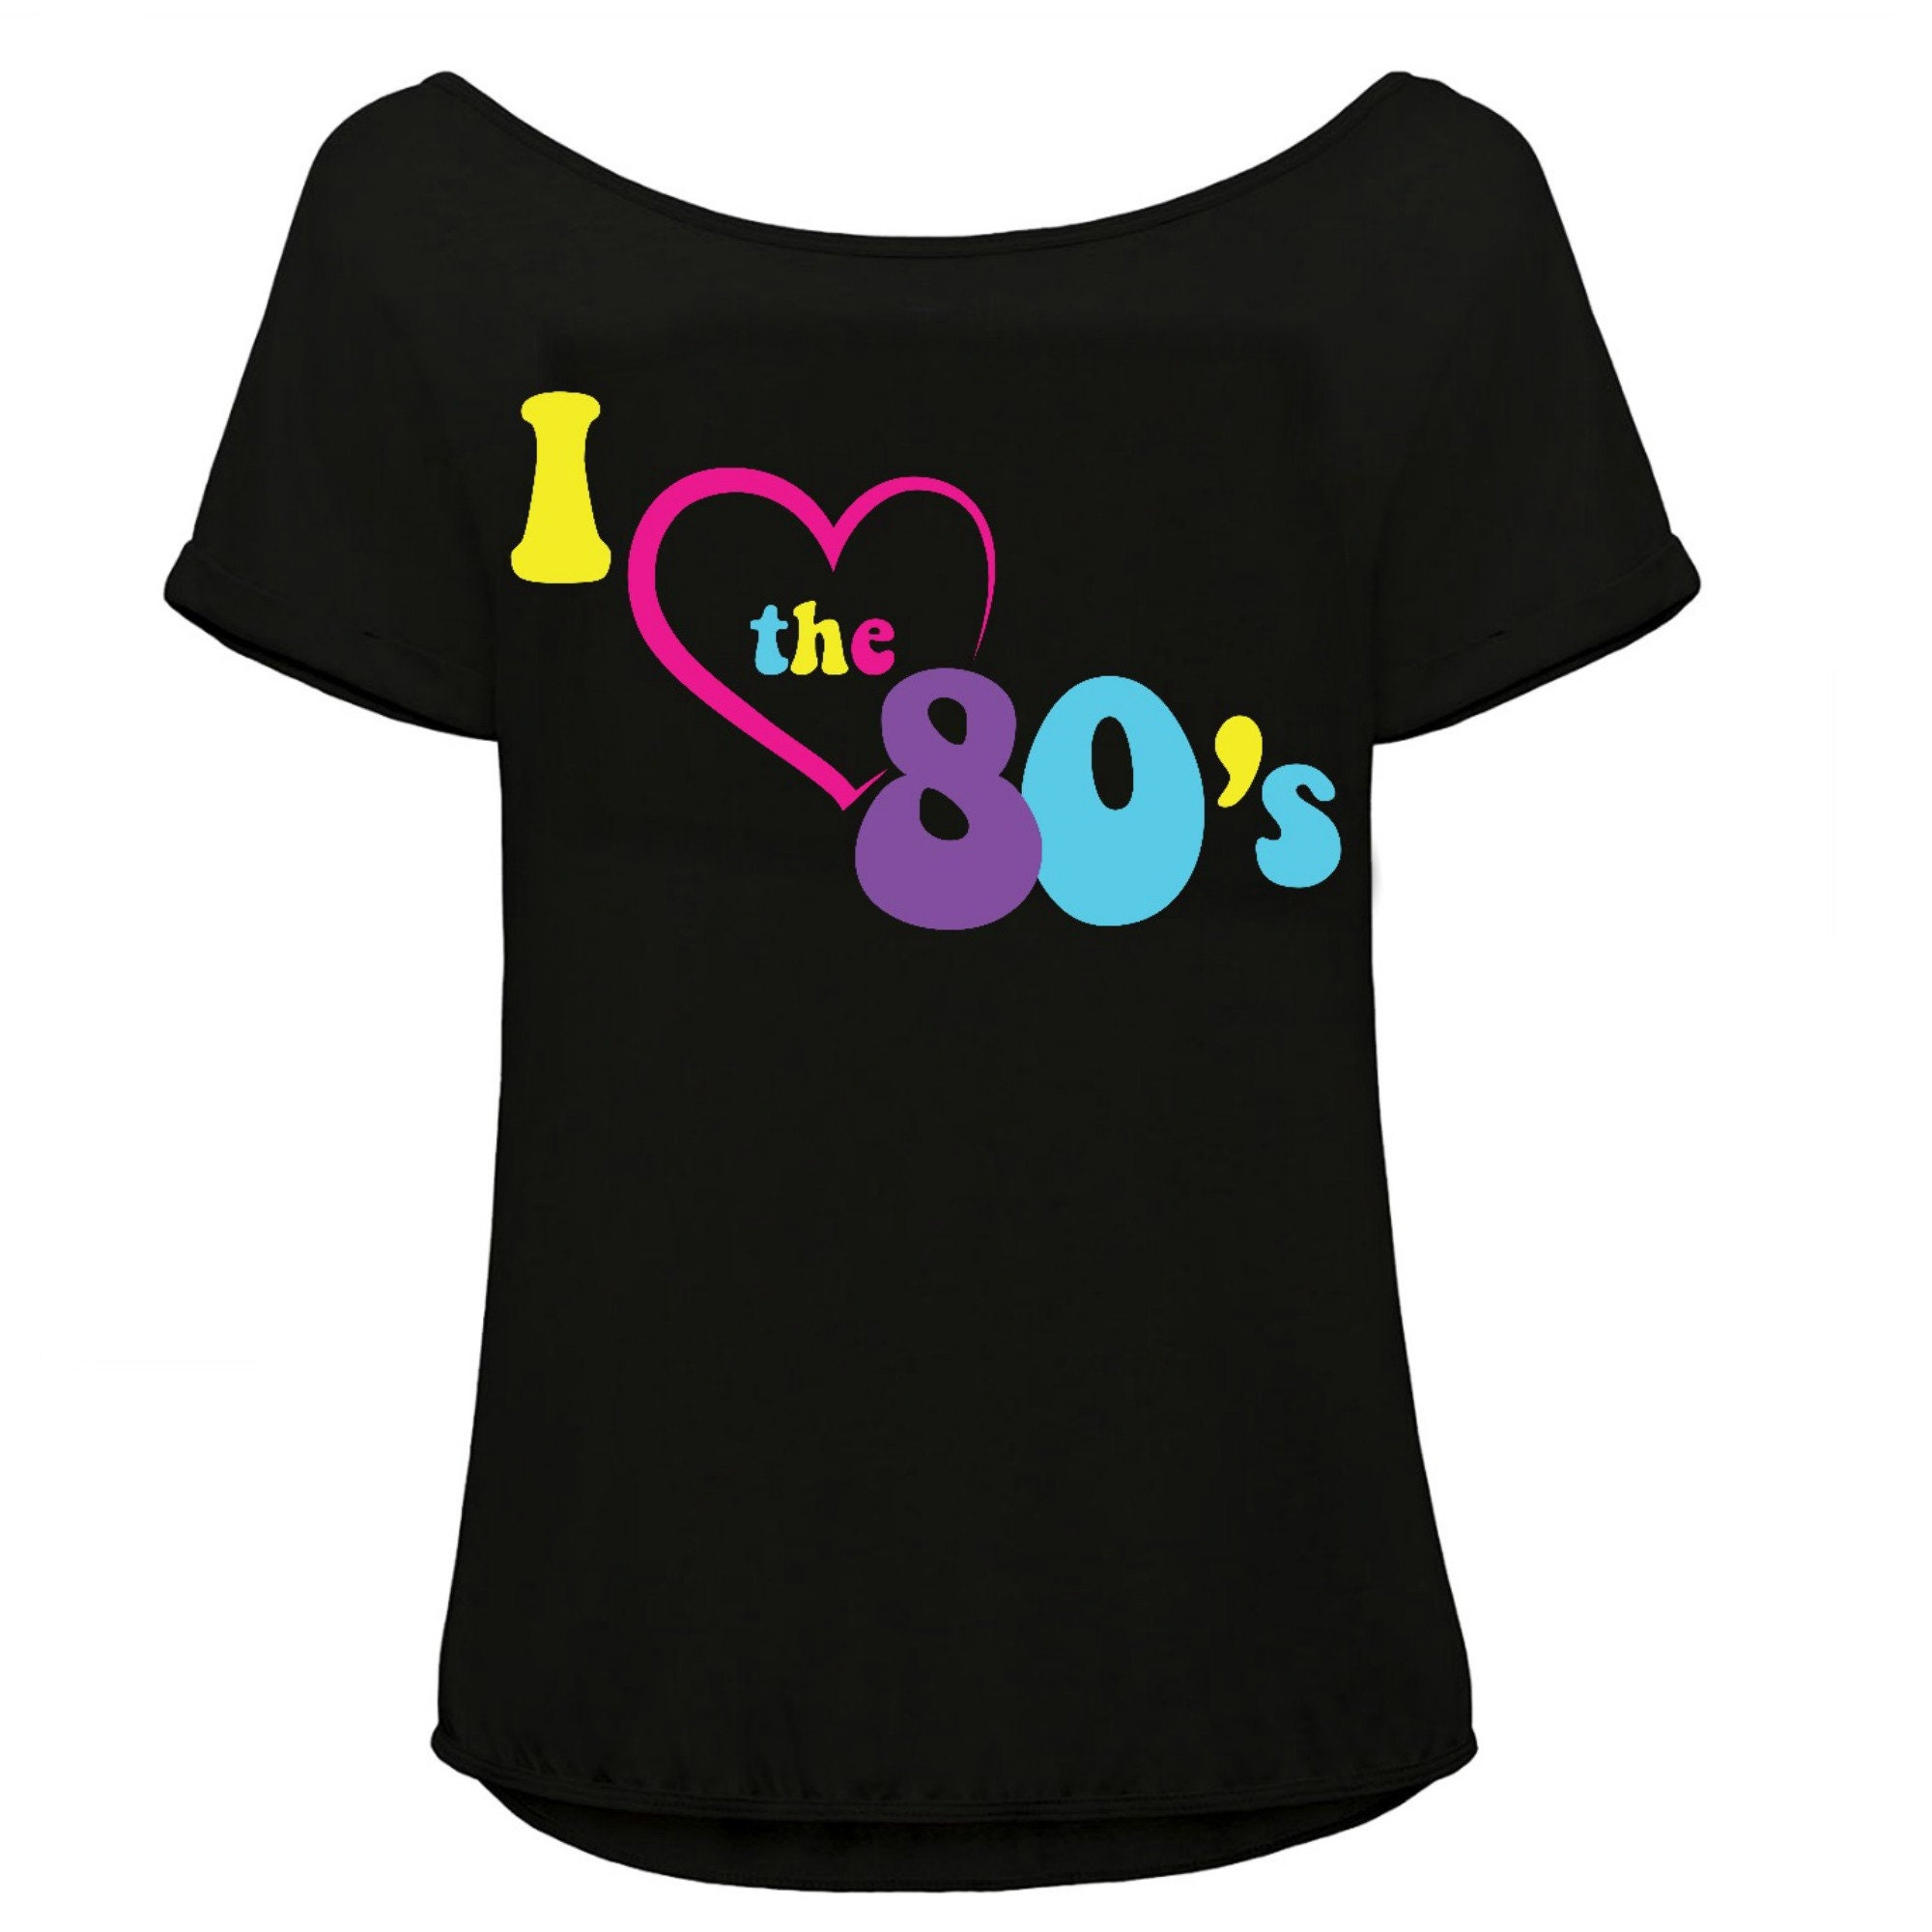  I Love The 80s Clothes for Women and Men Party Funny Tee  T-Shirt : Clothing, Shoes & Jewelry